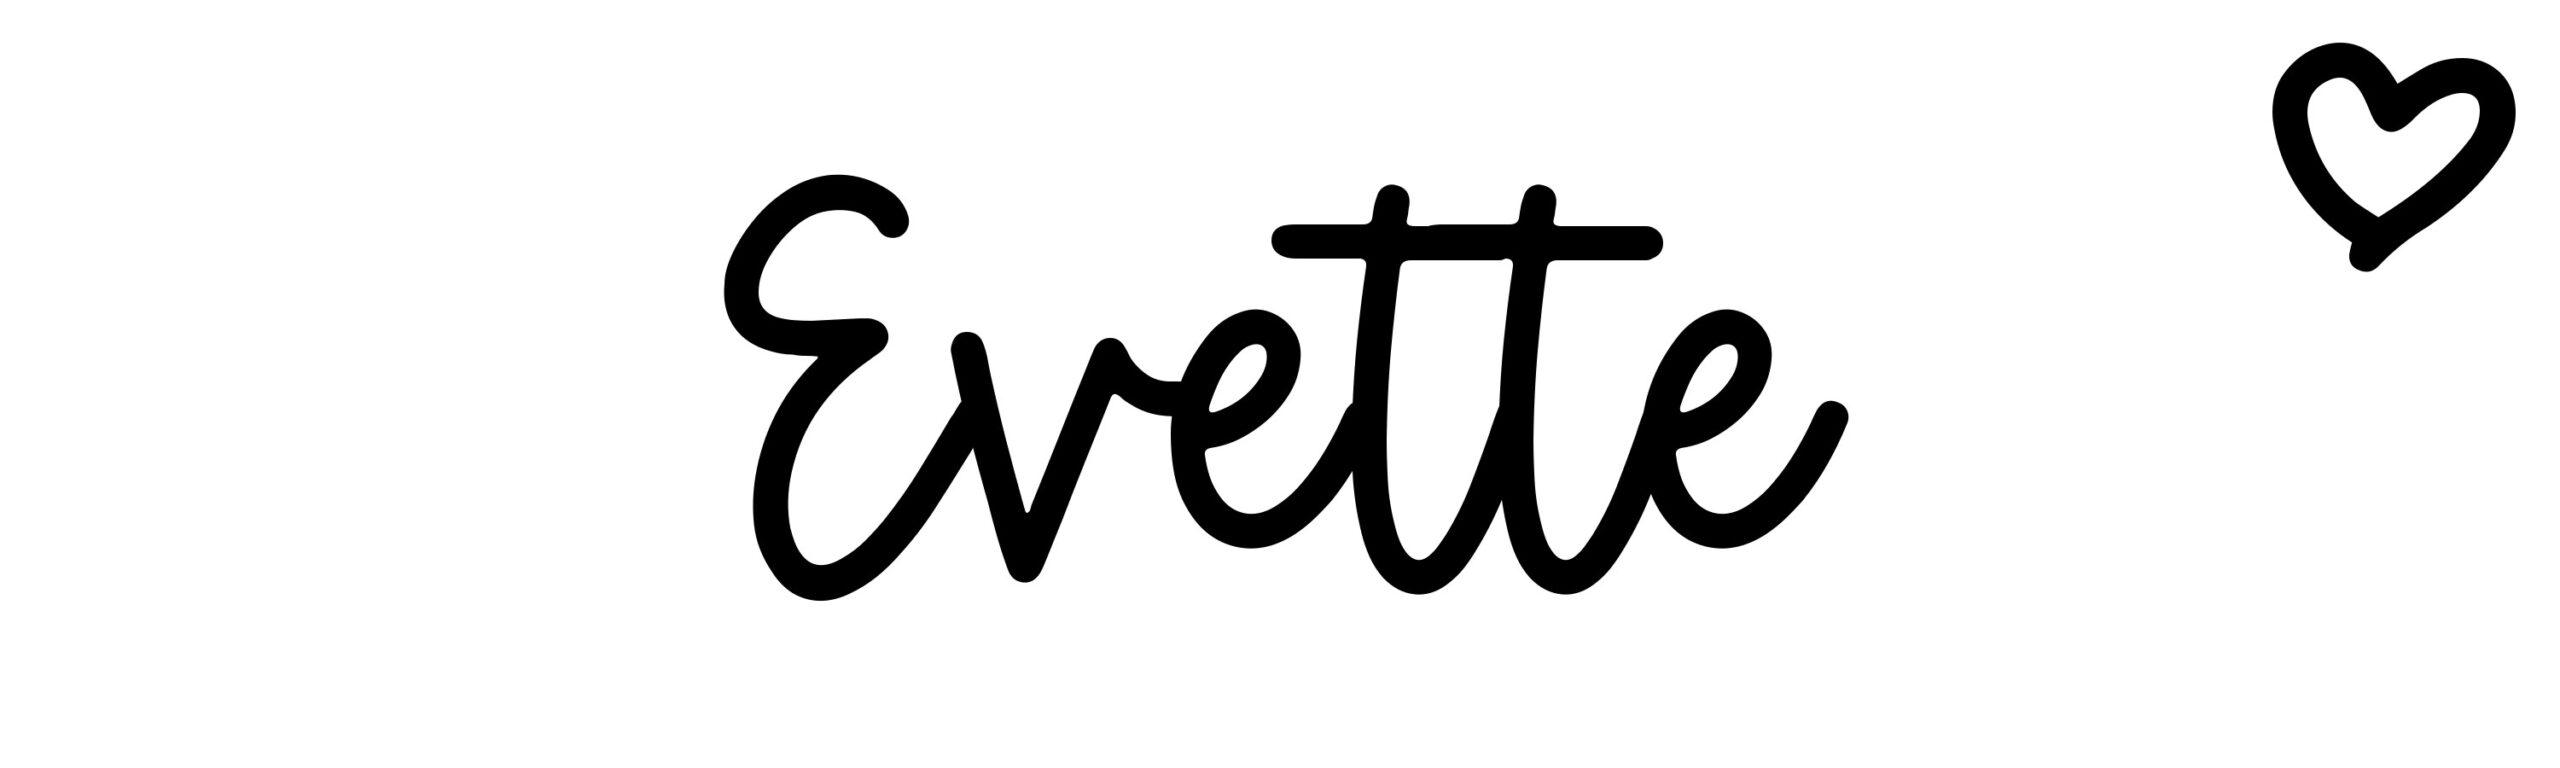 Evette: Name meaning & origin at ClickBabyNames